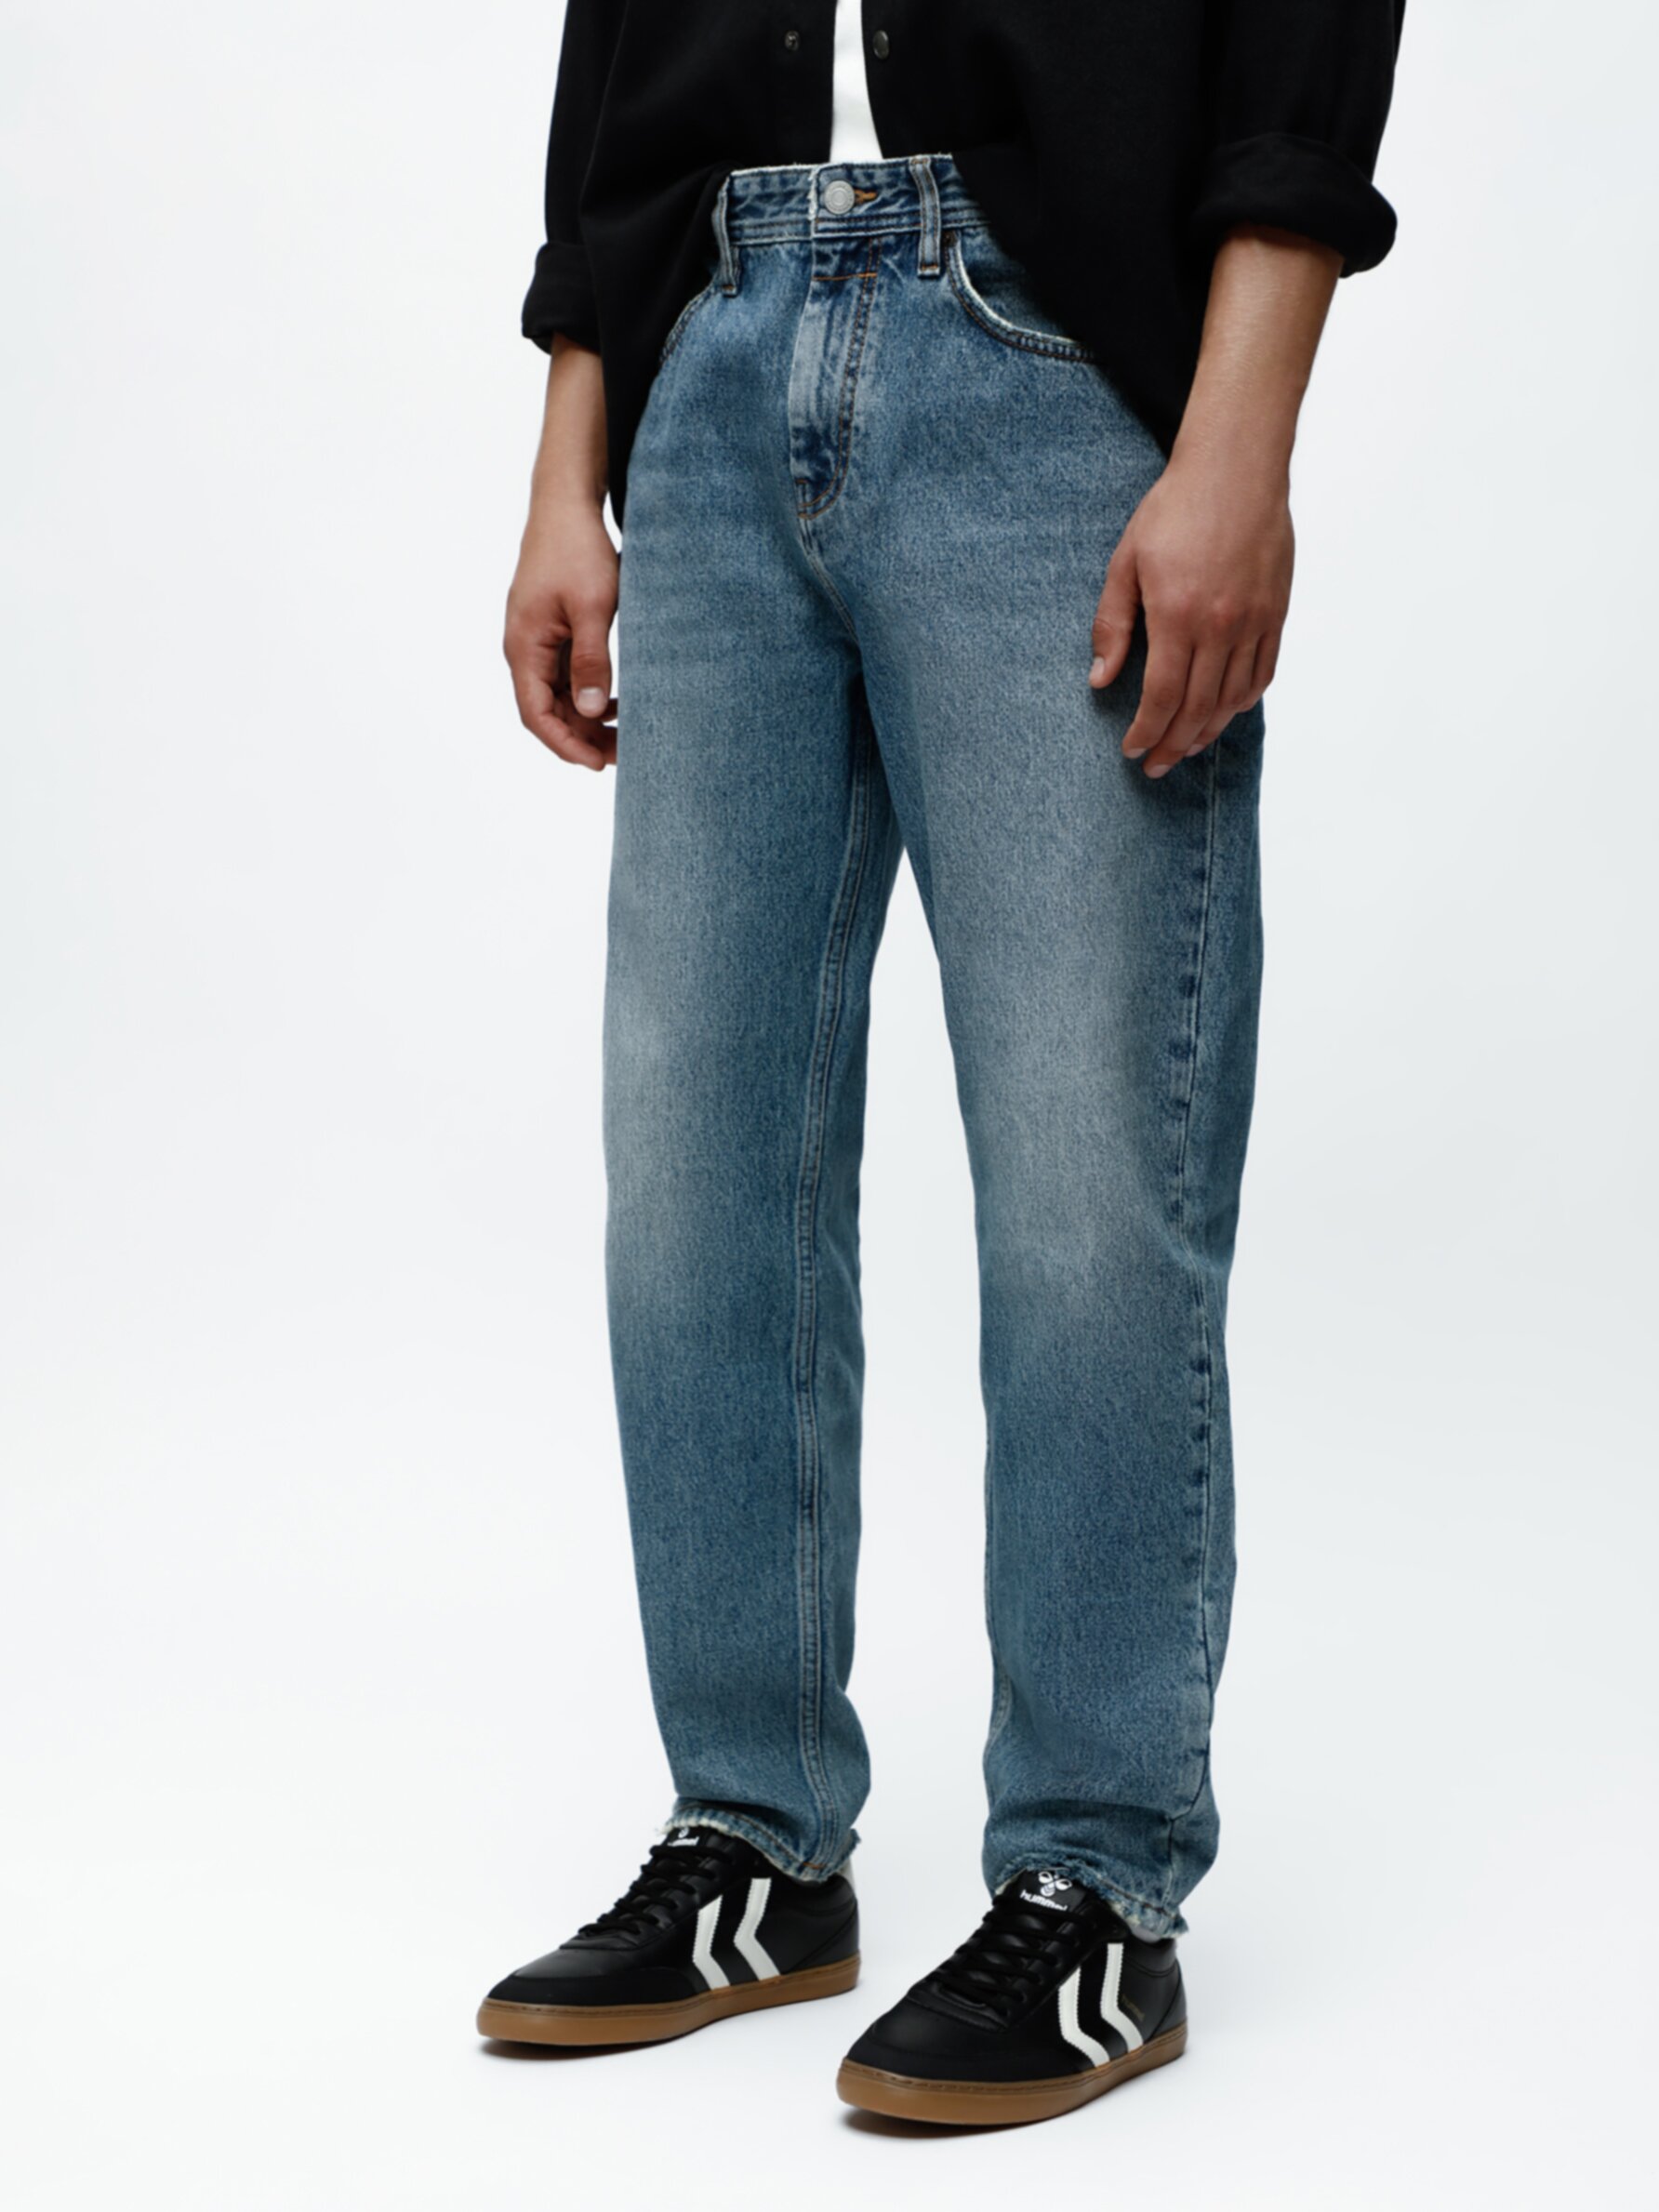 Relaxed fit jeans - Relaxed Jeans - Jeans - CLOTHING - Man